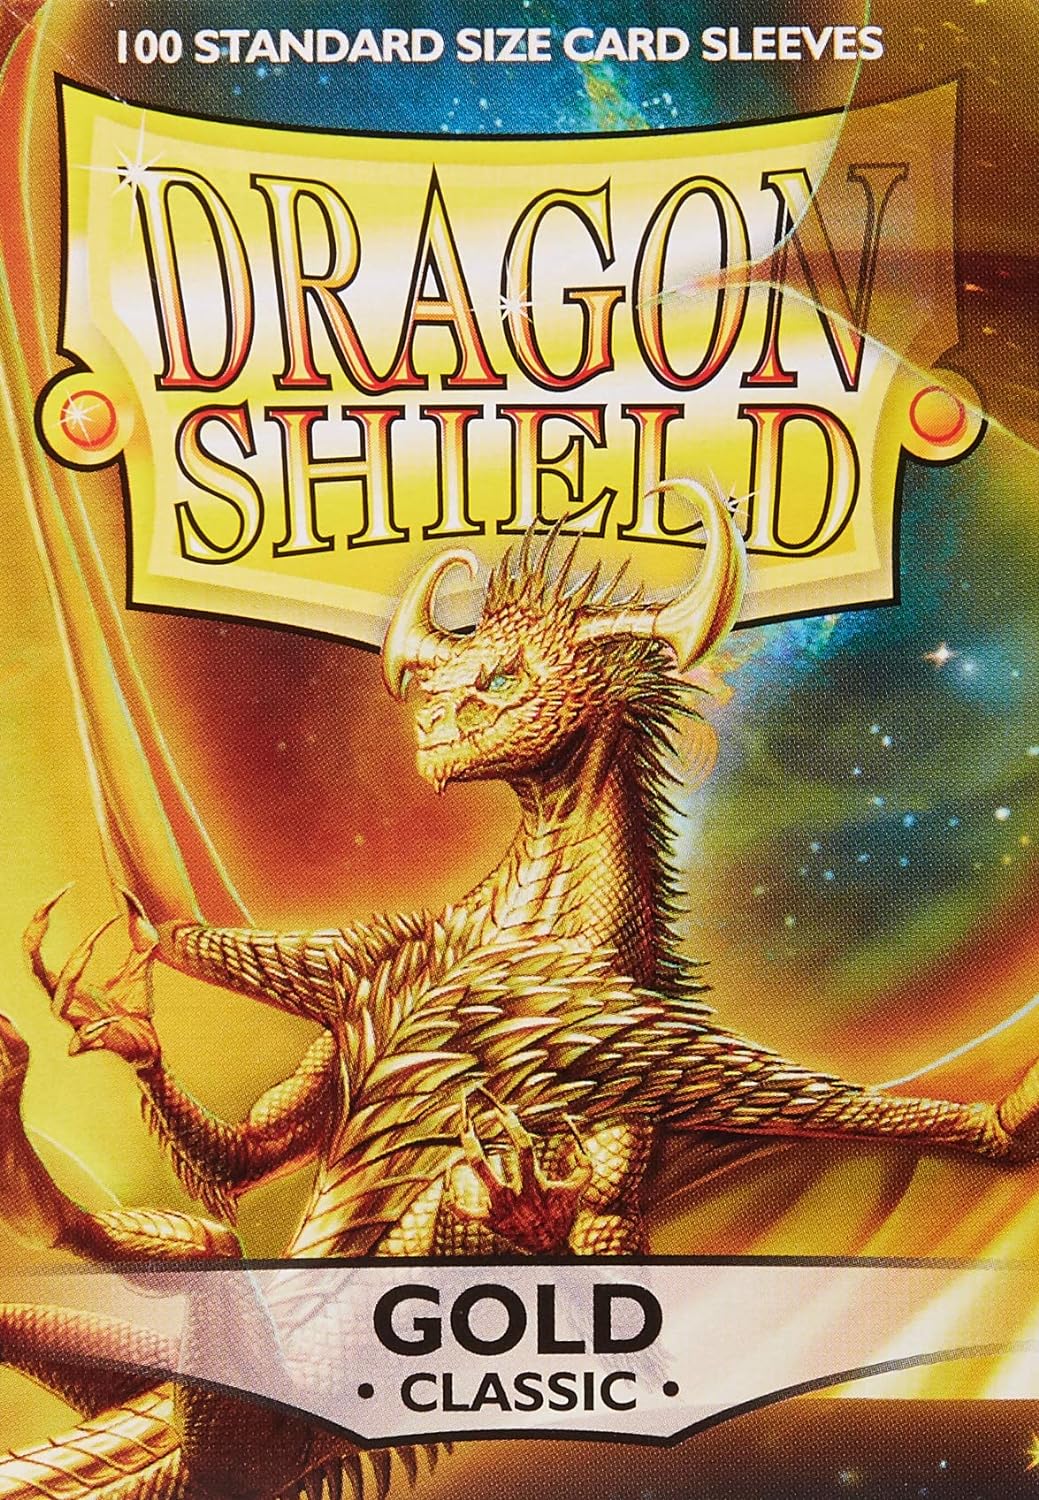 Dragon Shield Sleeves - GOLD - Standard Size Deck Protectors (100 ct) [Toy]